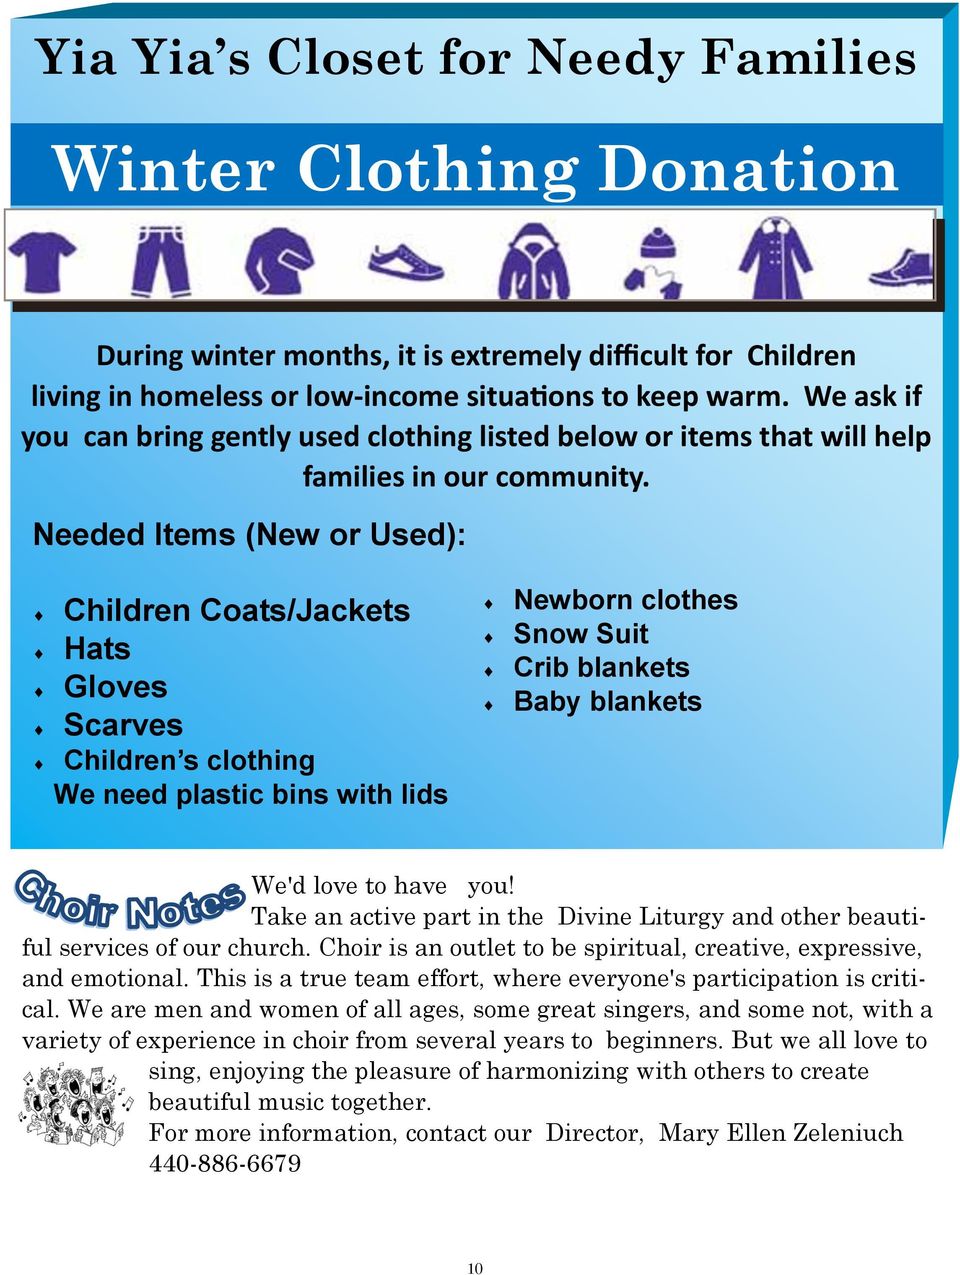 Needed Items (New or Used): Children Coats/Jackets Hats Gloves Scarves Children s clothing We need plastic bins with lids Newborn clothes Snow Suit Crib blankets Baby blankets We'd love to have you!